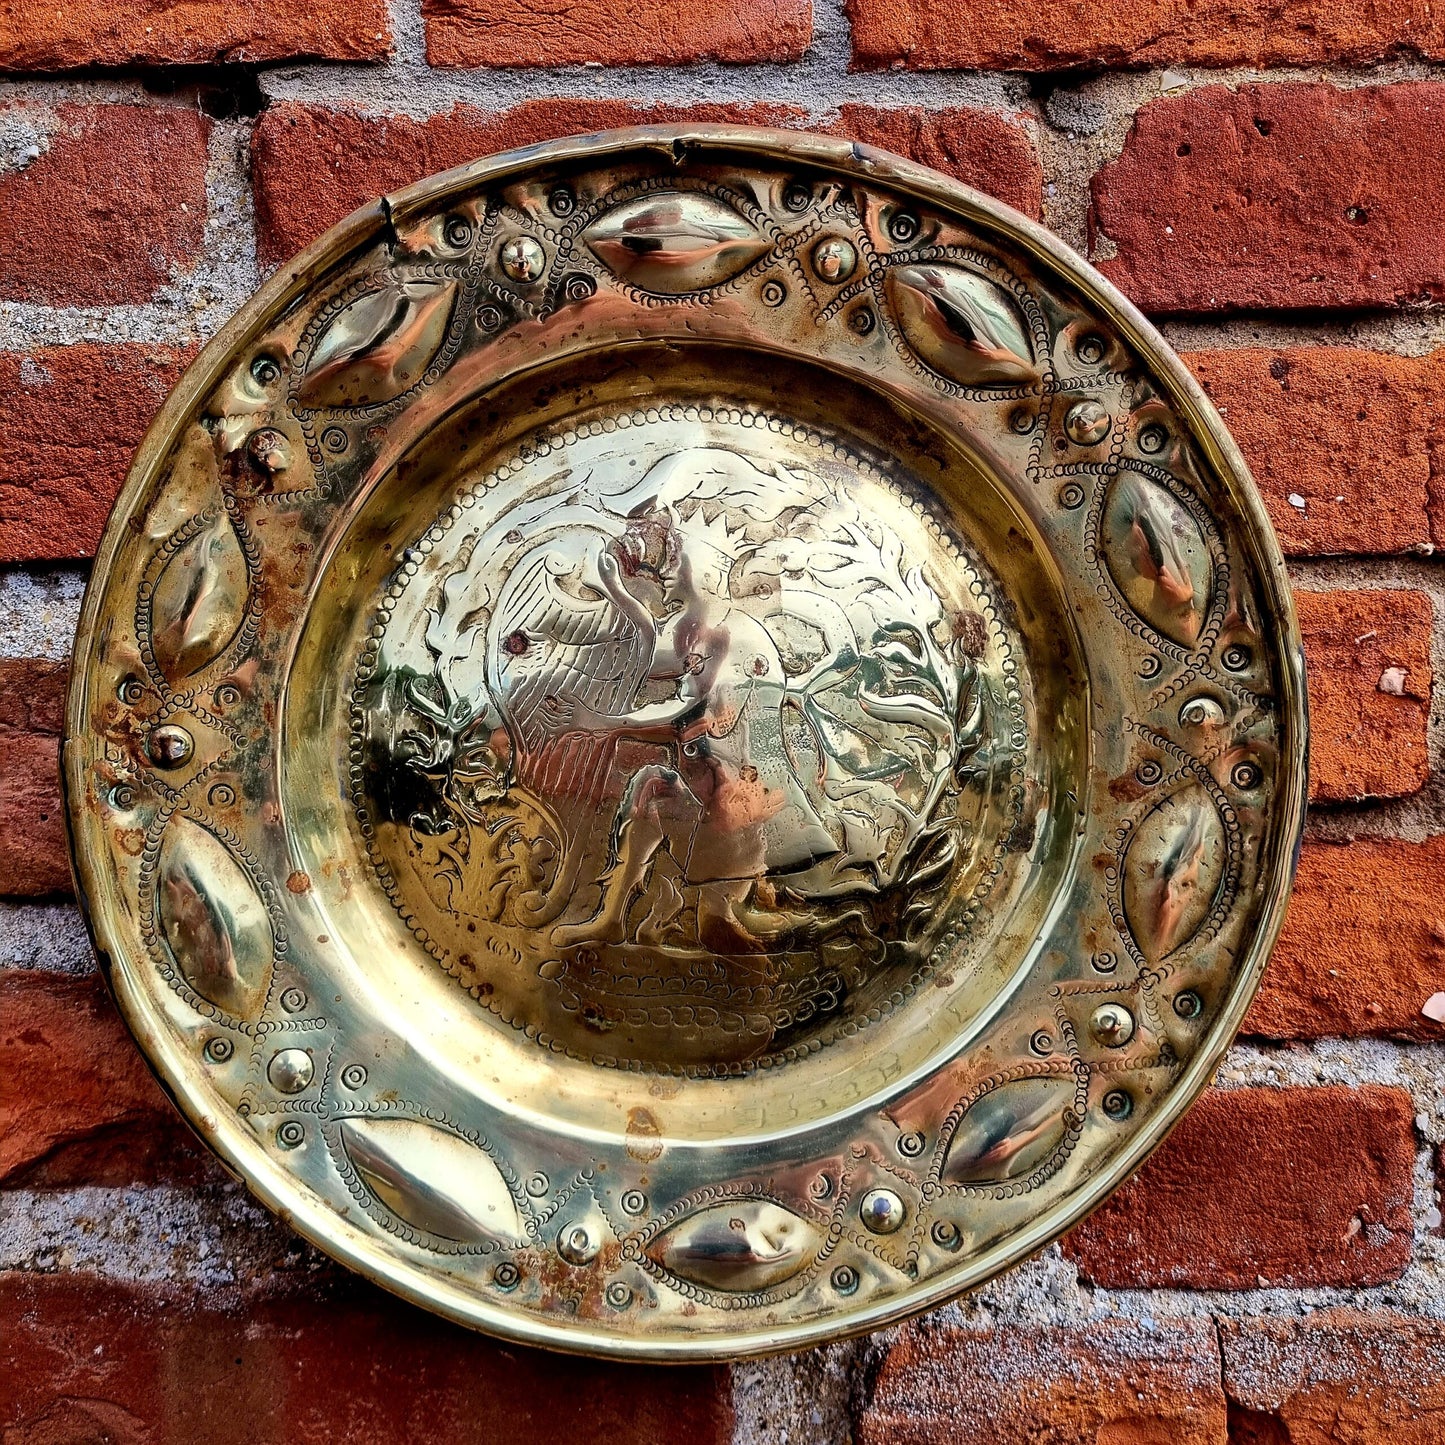 16th Century German Antique Brass Nuremberg Alms Dish Decorated with King David Playing a Harp